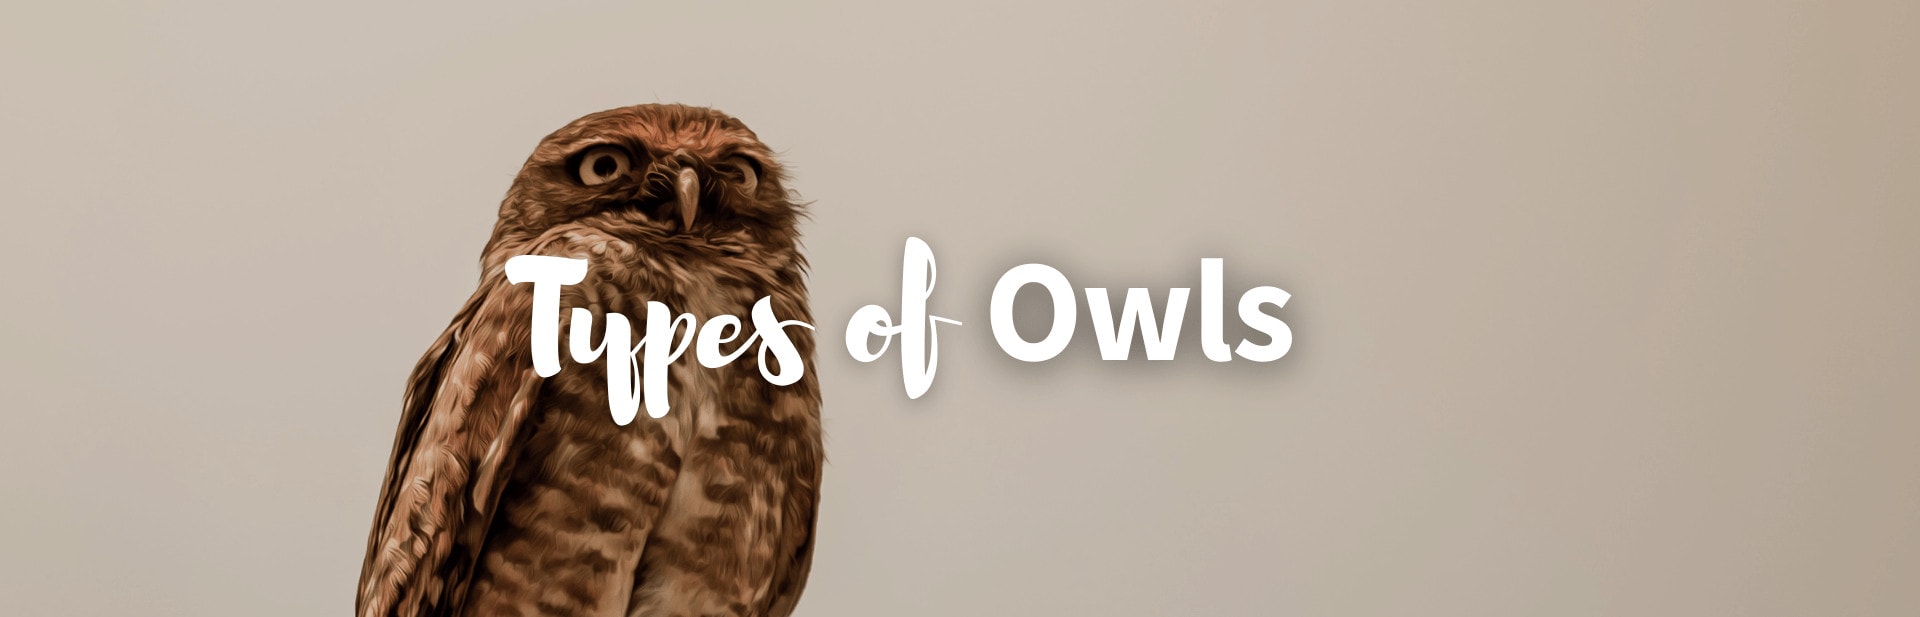 225 Types of Owls: Pictures, Facts and More